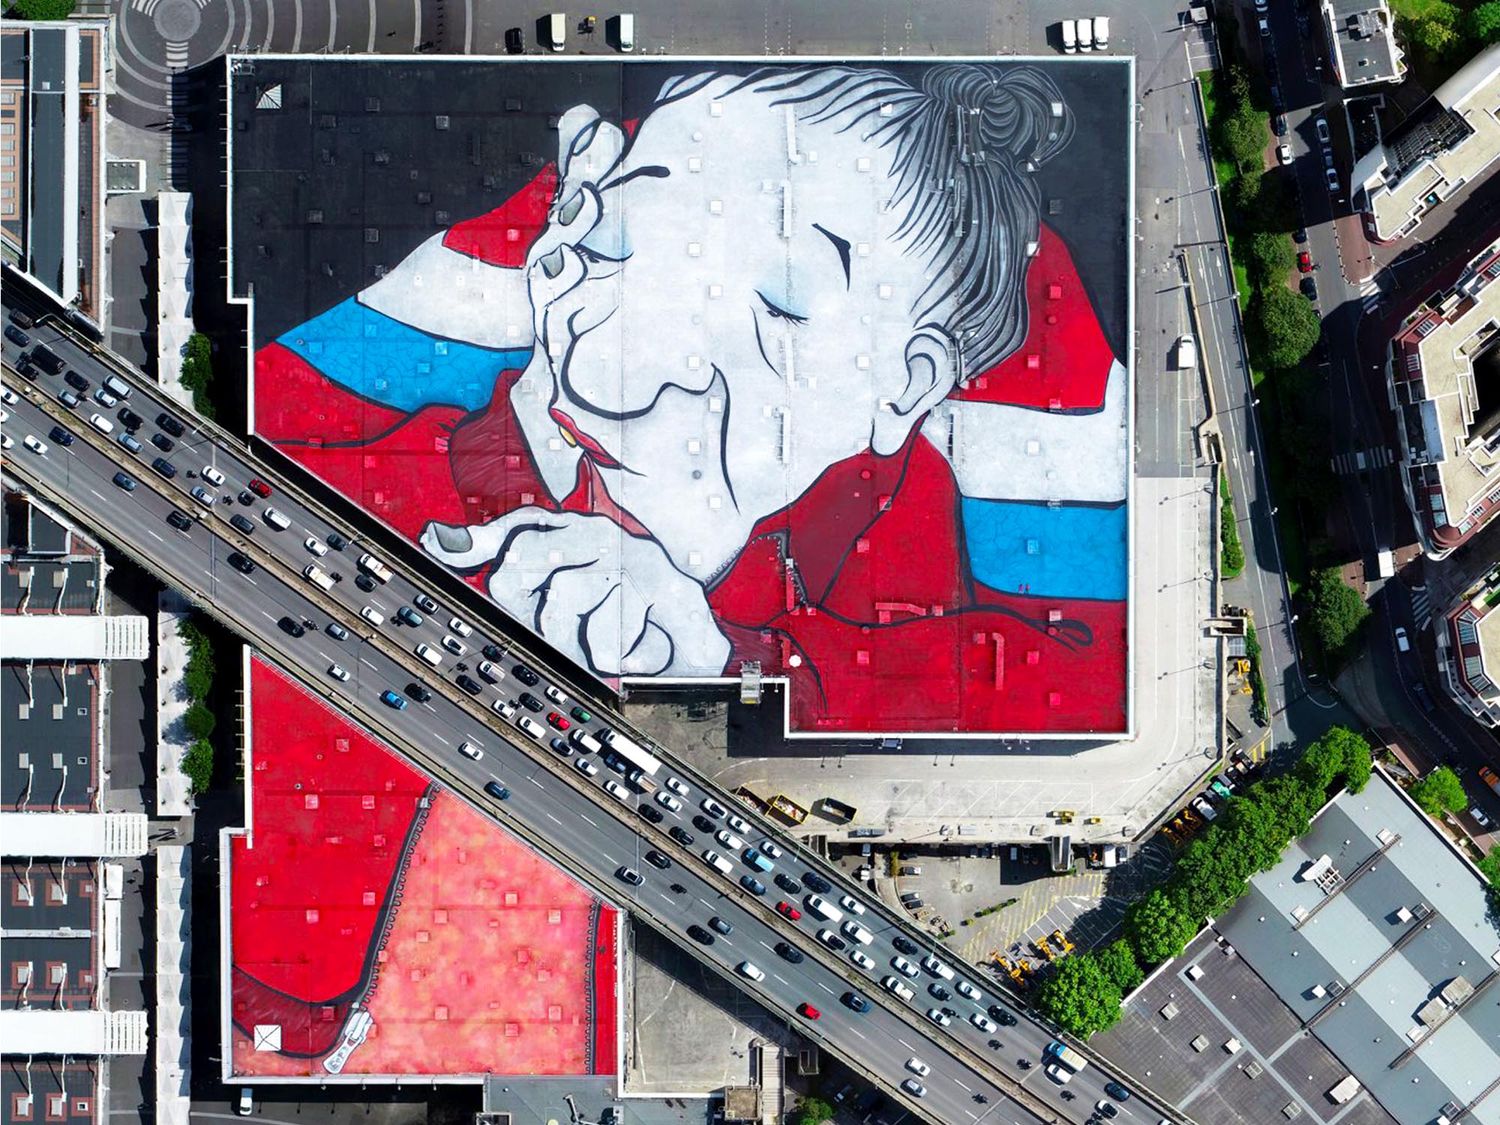 Entitled "Wake me up when it's over", the mural done by Ella and Pitr in 2019 at The Paris Expo Porte de Versailles is still the largest in Europe thanks to its 2.5 hectares (©Ludovic Delage).